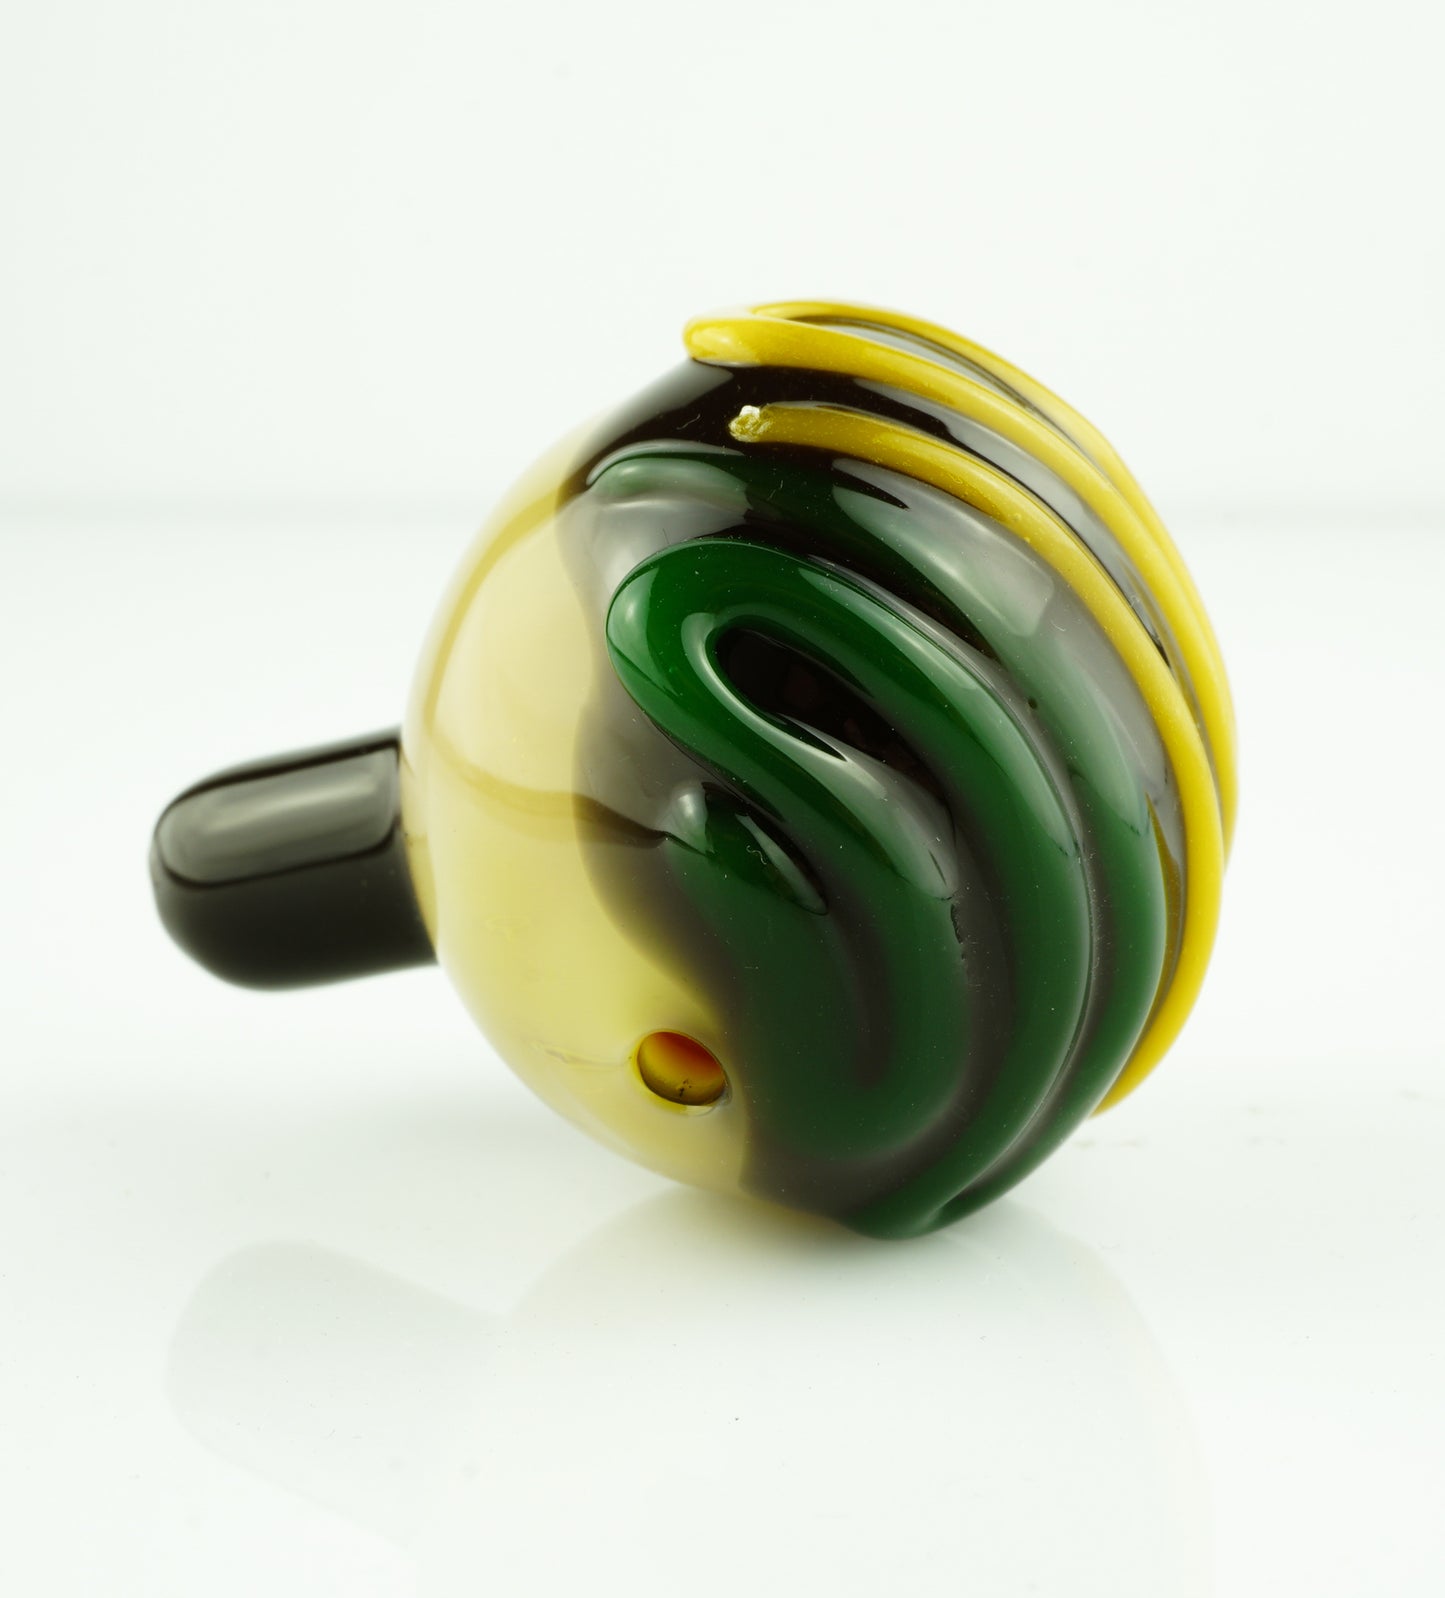 Chocolate Frosted Rasta Bubble Cap